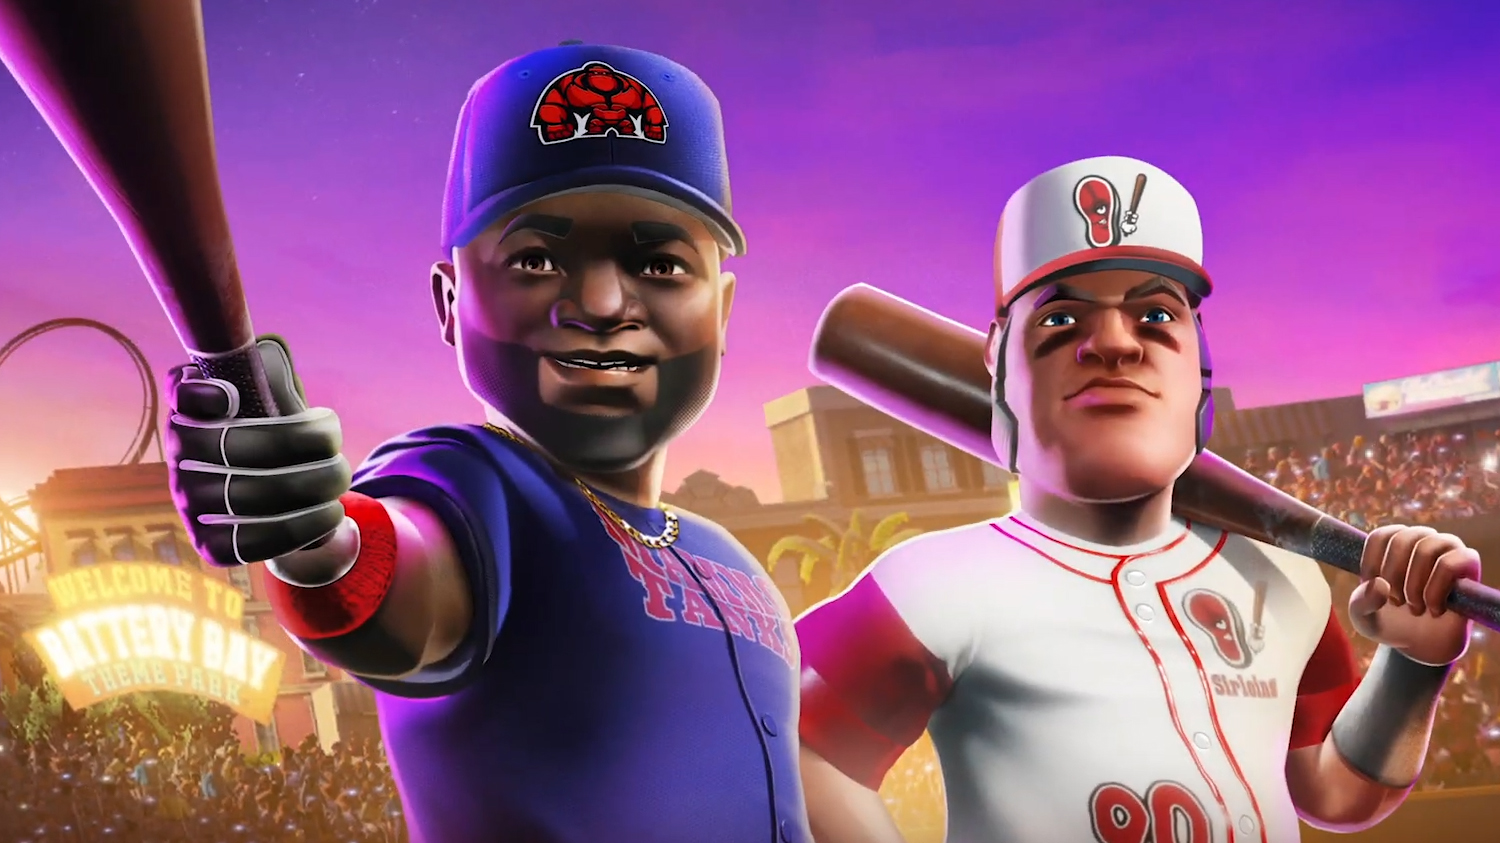 Super Mega Baseball 4 launches in June with over 200 former pro players including David Ortiz, Willie Mays, and Babe Ruth PC Gamer